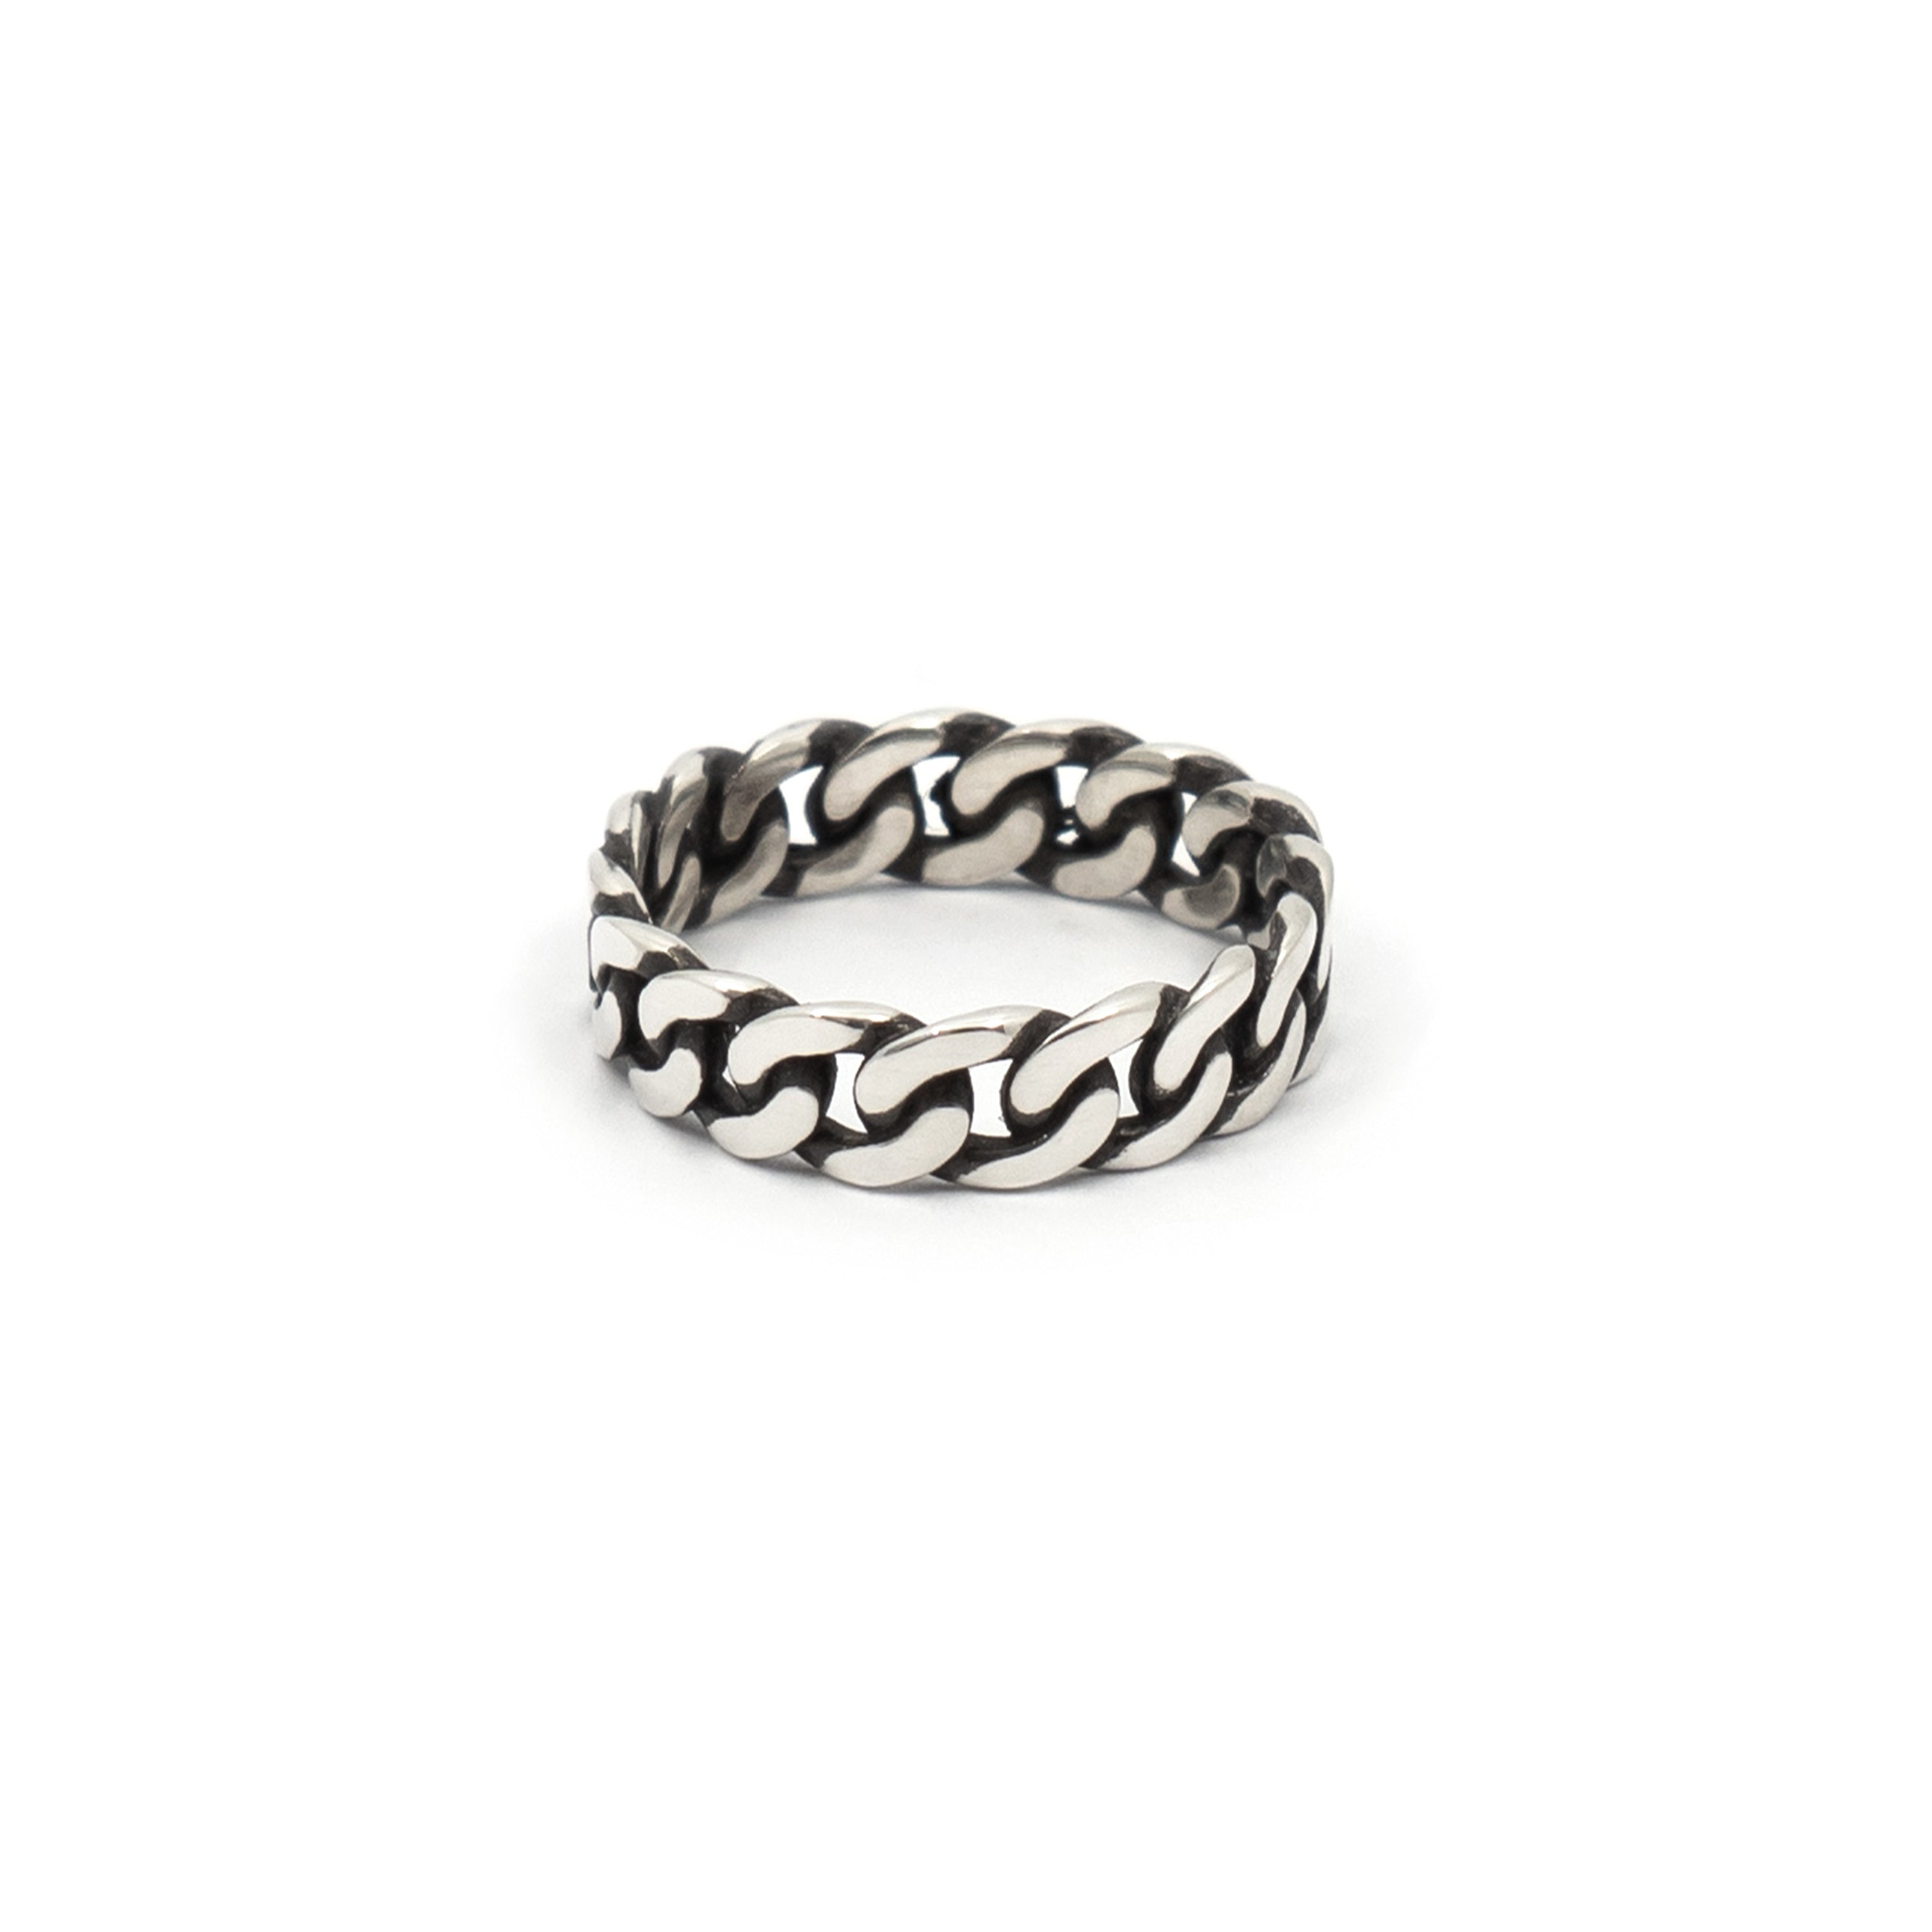 Silver Chain Ring | Fashion Jewelry by Yordy.